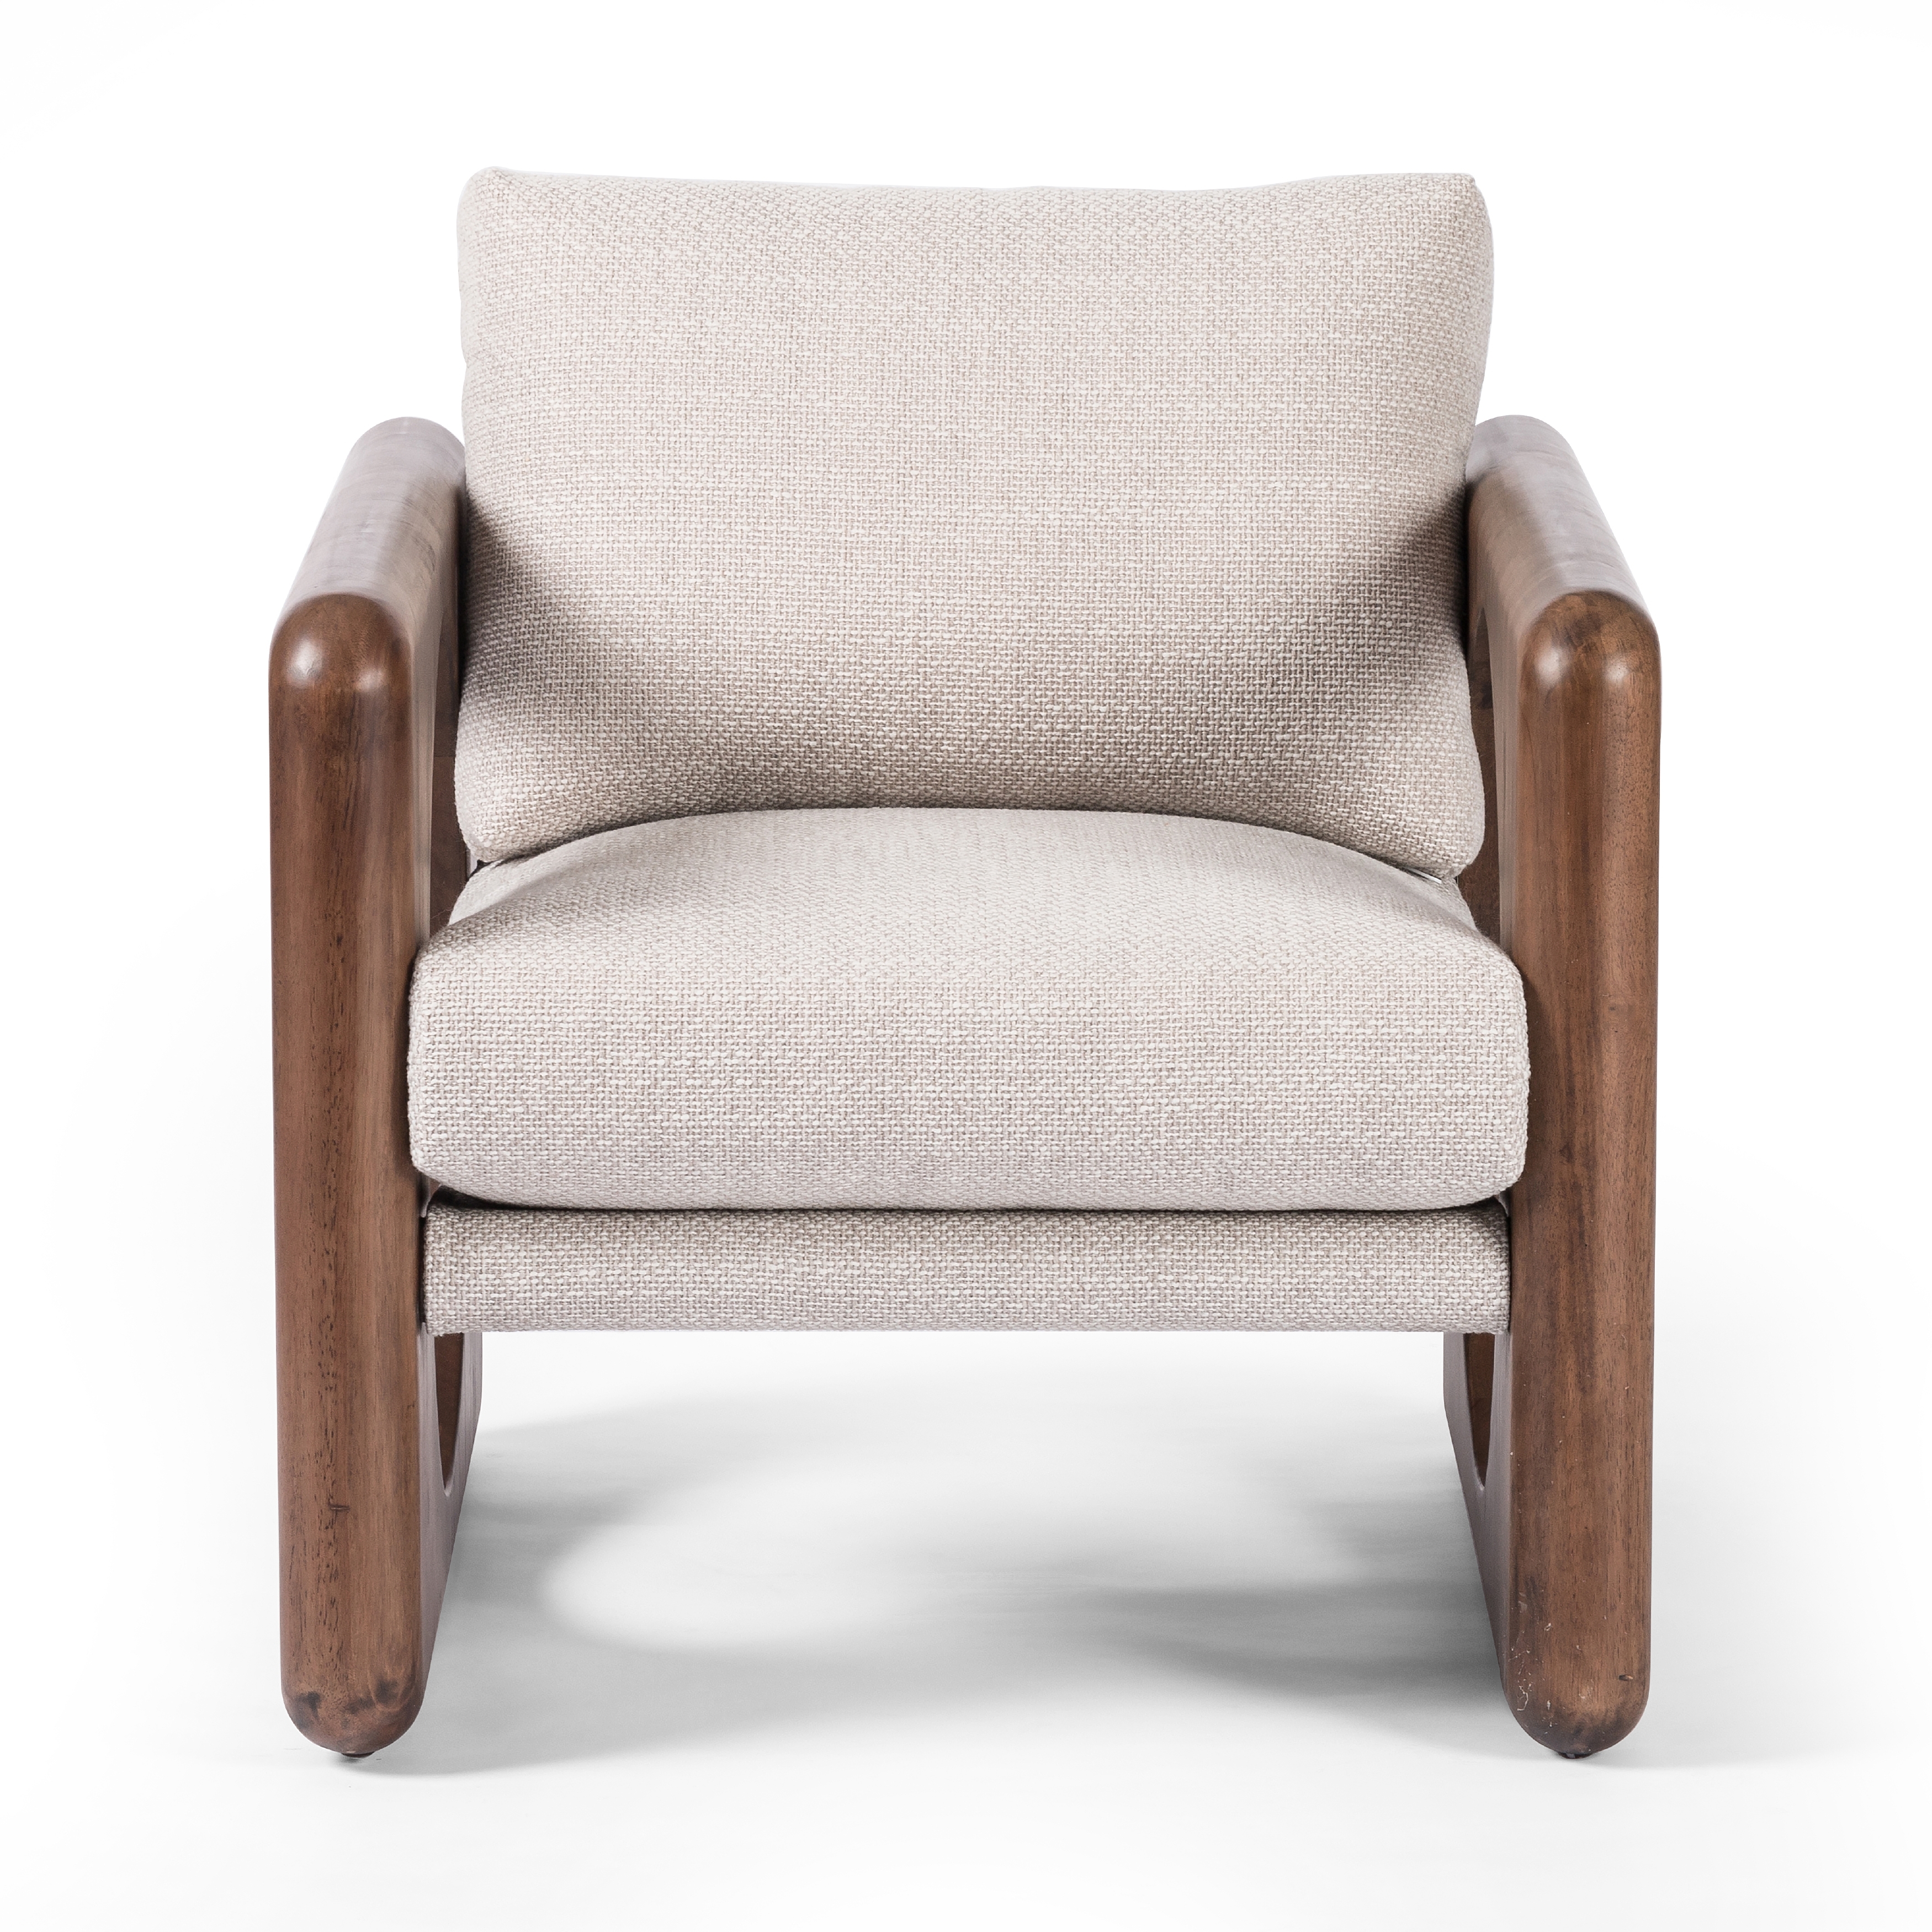 Downey Chair-Gibson Wheat - Image 3